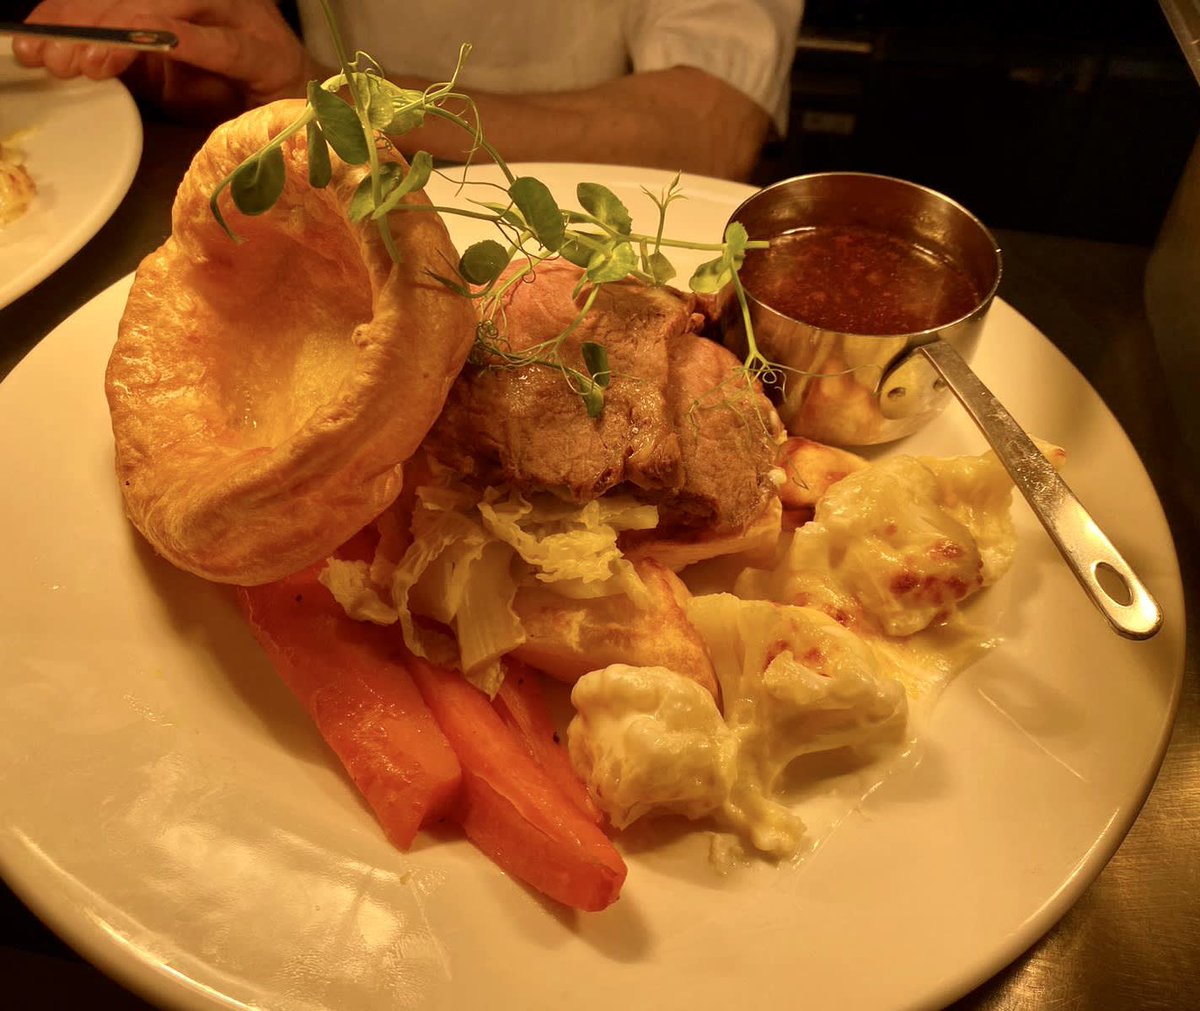 Our chefs put so much effort into our Sunday Roasts to make them look and taste amazing! Pop down this Easter Sunday to grab yours and watch the footy! 

#sundayroast#beefchickenornutroast #takeyourpick #meatorvegan #teamteddy #kitchenteam #teddington #highstreet